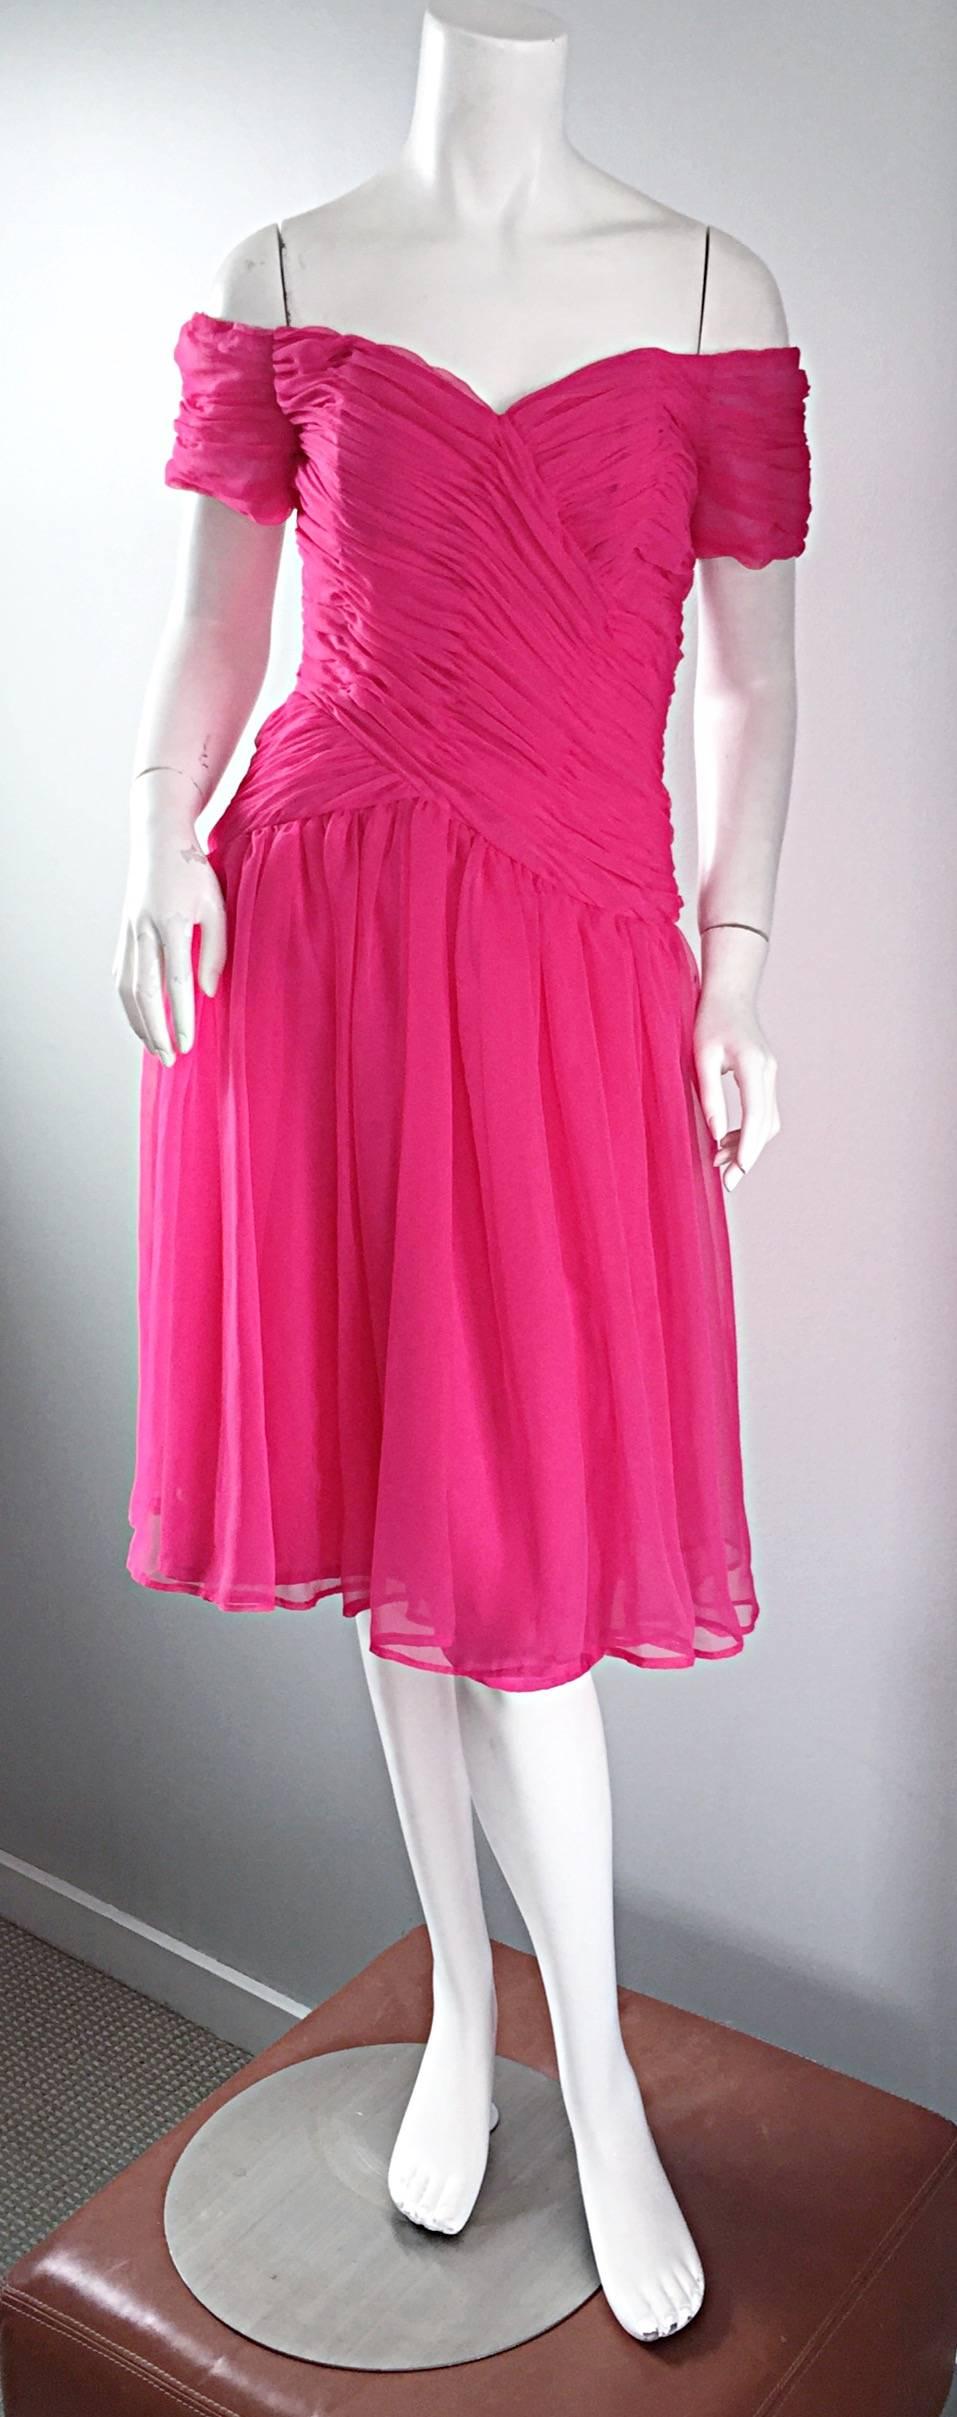 Sexy vintage late 1980s VICTOR COSTA for BERGDORF GOODMAN hot pink fuchsia chiffon off-the-shoulder ruched dress! Flattering fitted ruched bodice on the front and back, with an attached full skirt. Full hidden zipper up the back with hook-and-eye